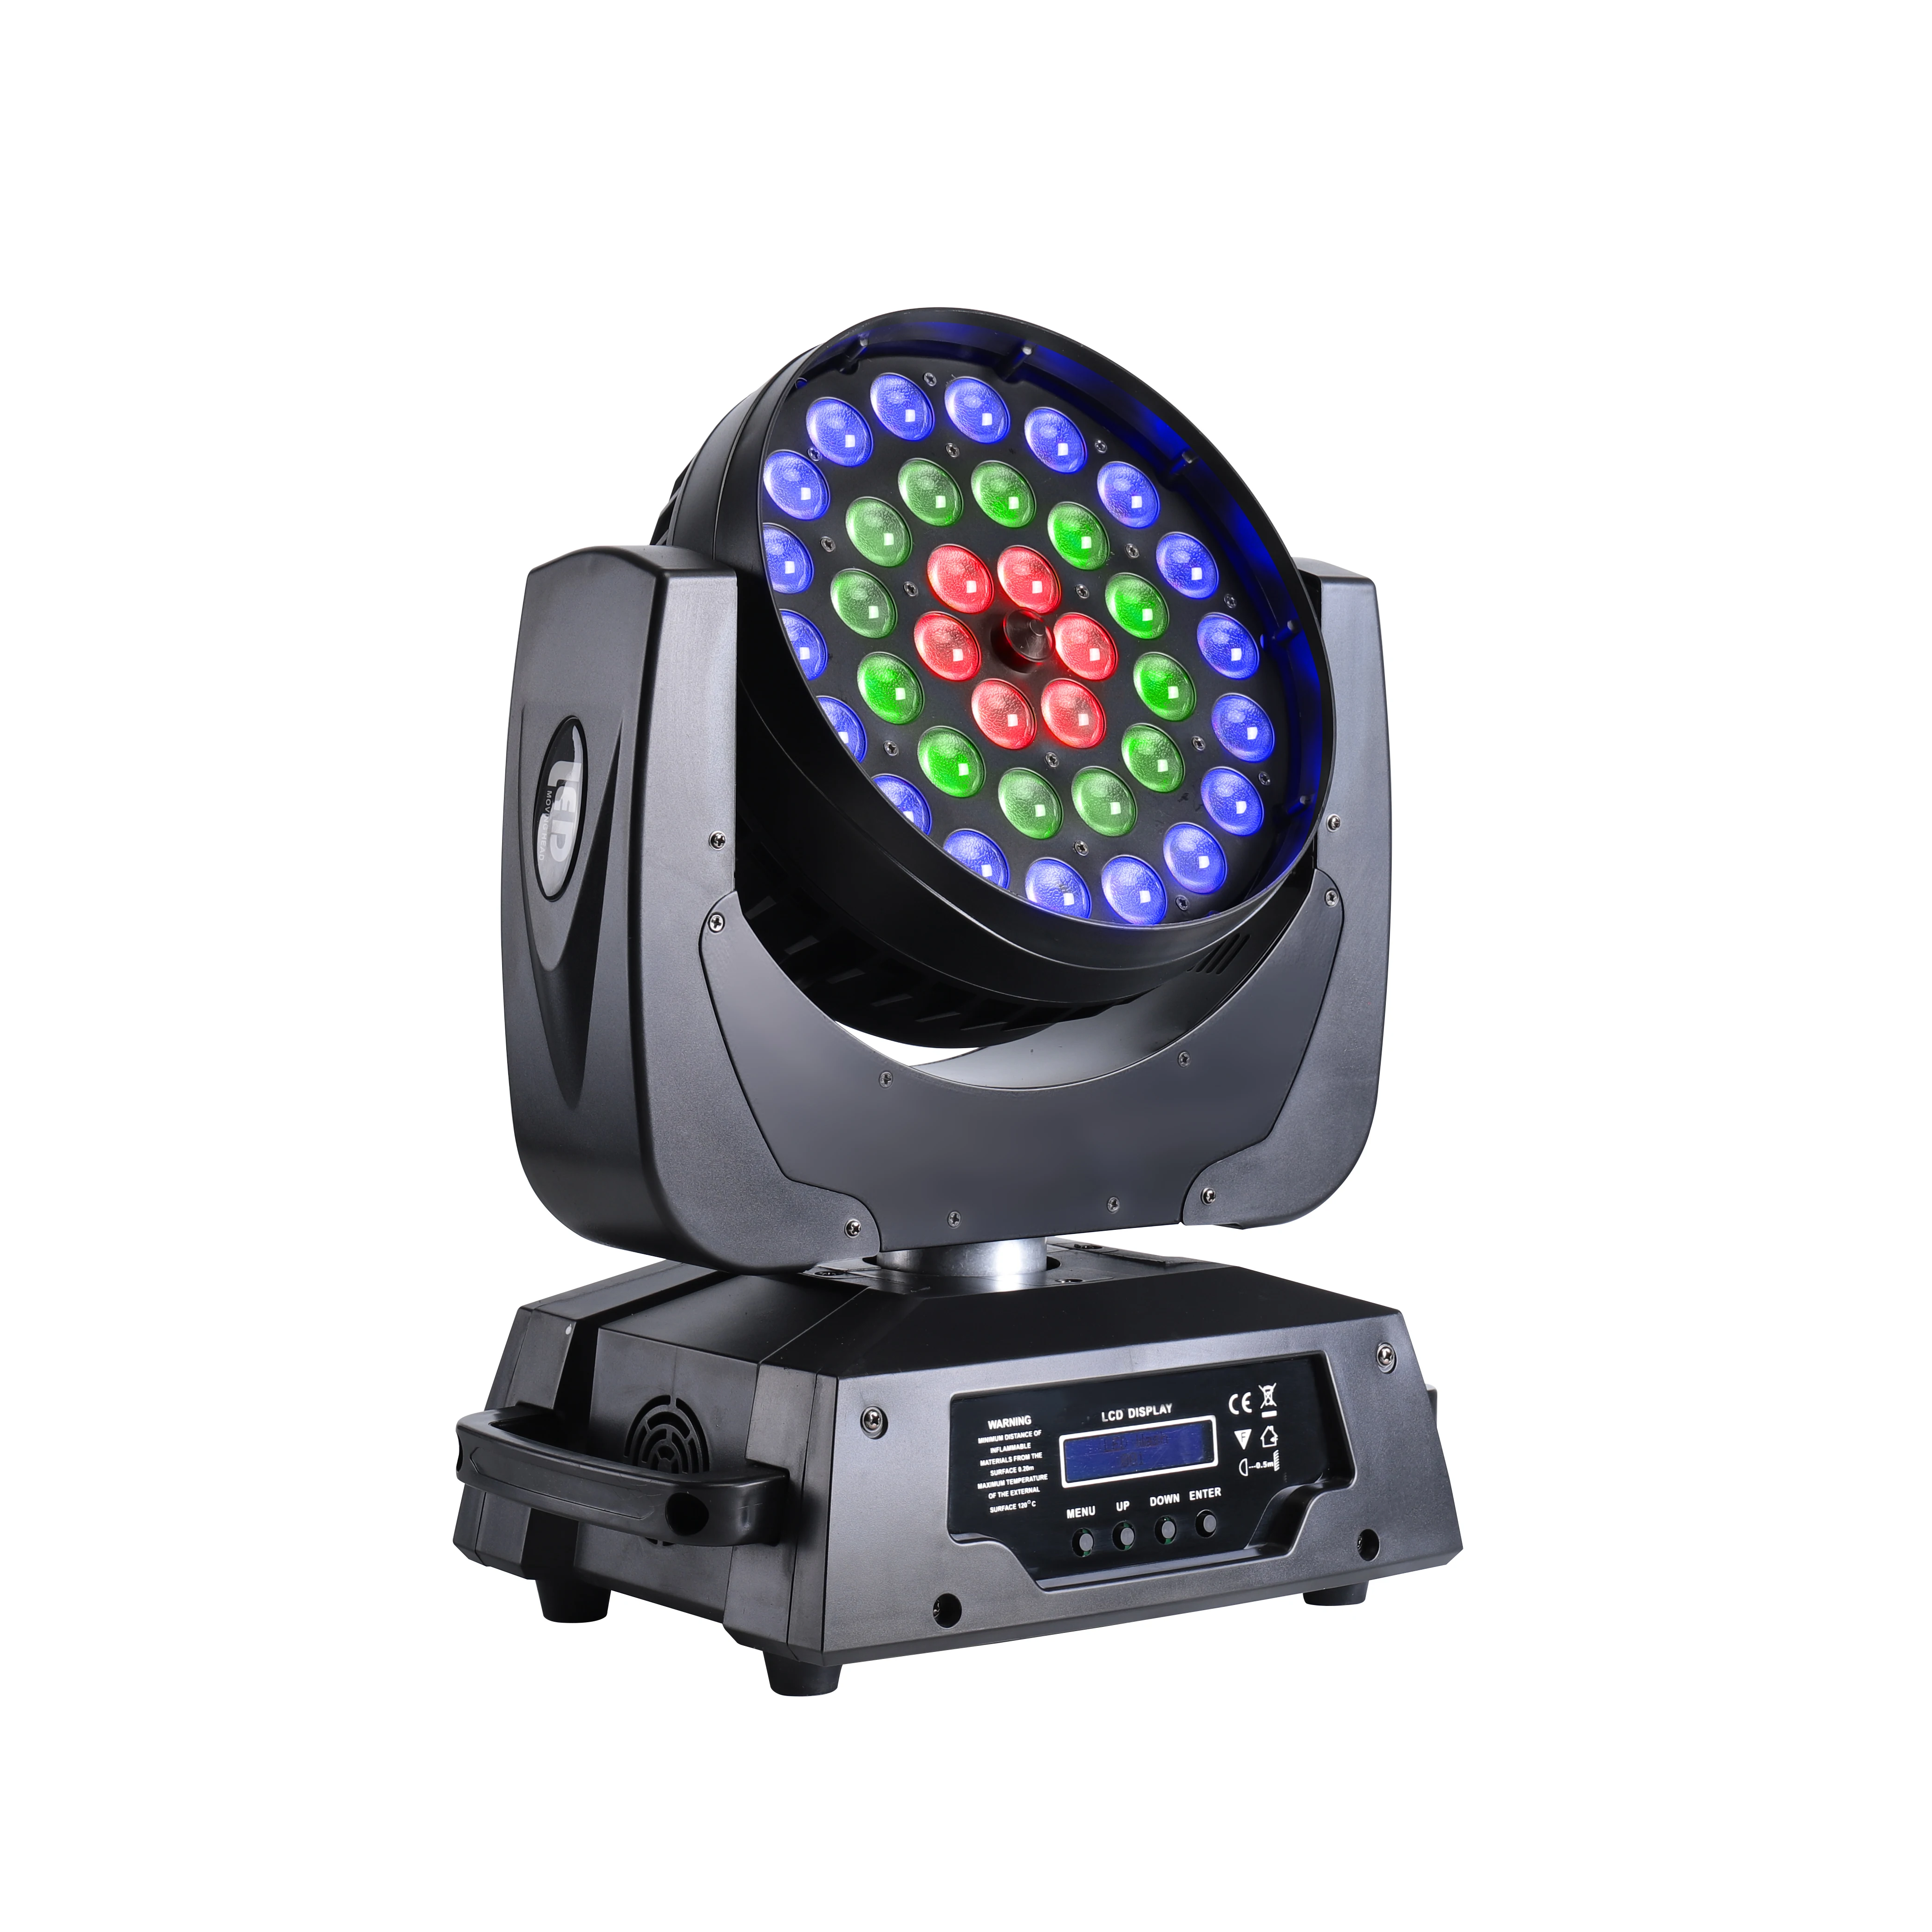 1 LED Moving Head Wash Beam Stage Light Spotlight Lamp 14CH DMX512 RGBW for Disco DJ Club Christmas Birthday Wedding Party Stage Light 4 in1 Boudler Pro 36x10W RGBW 